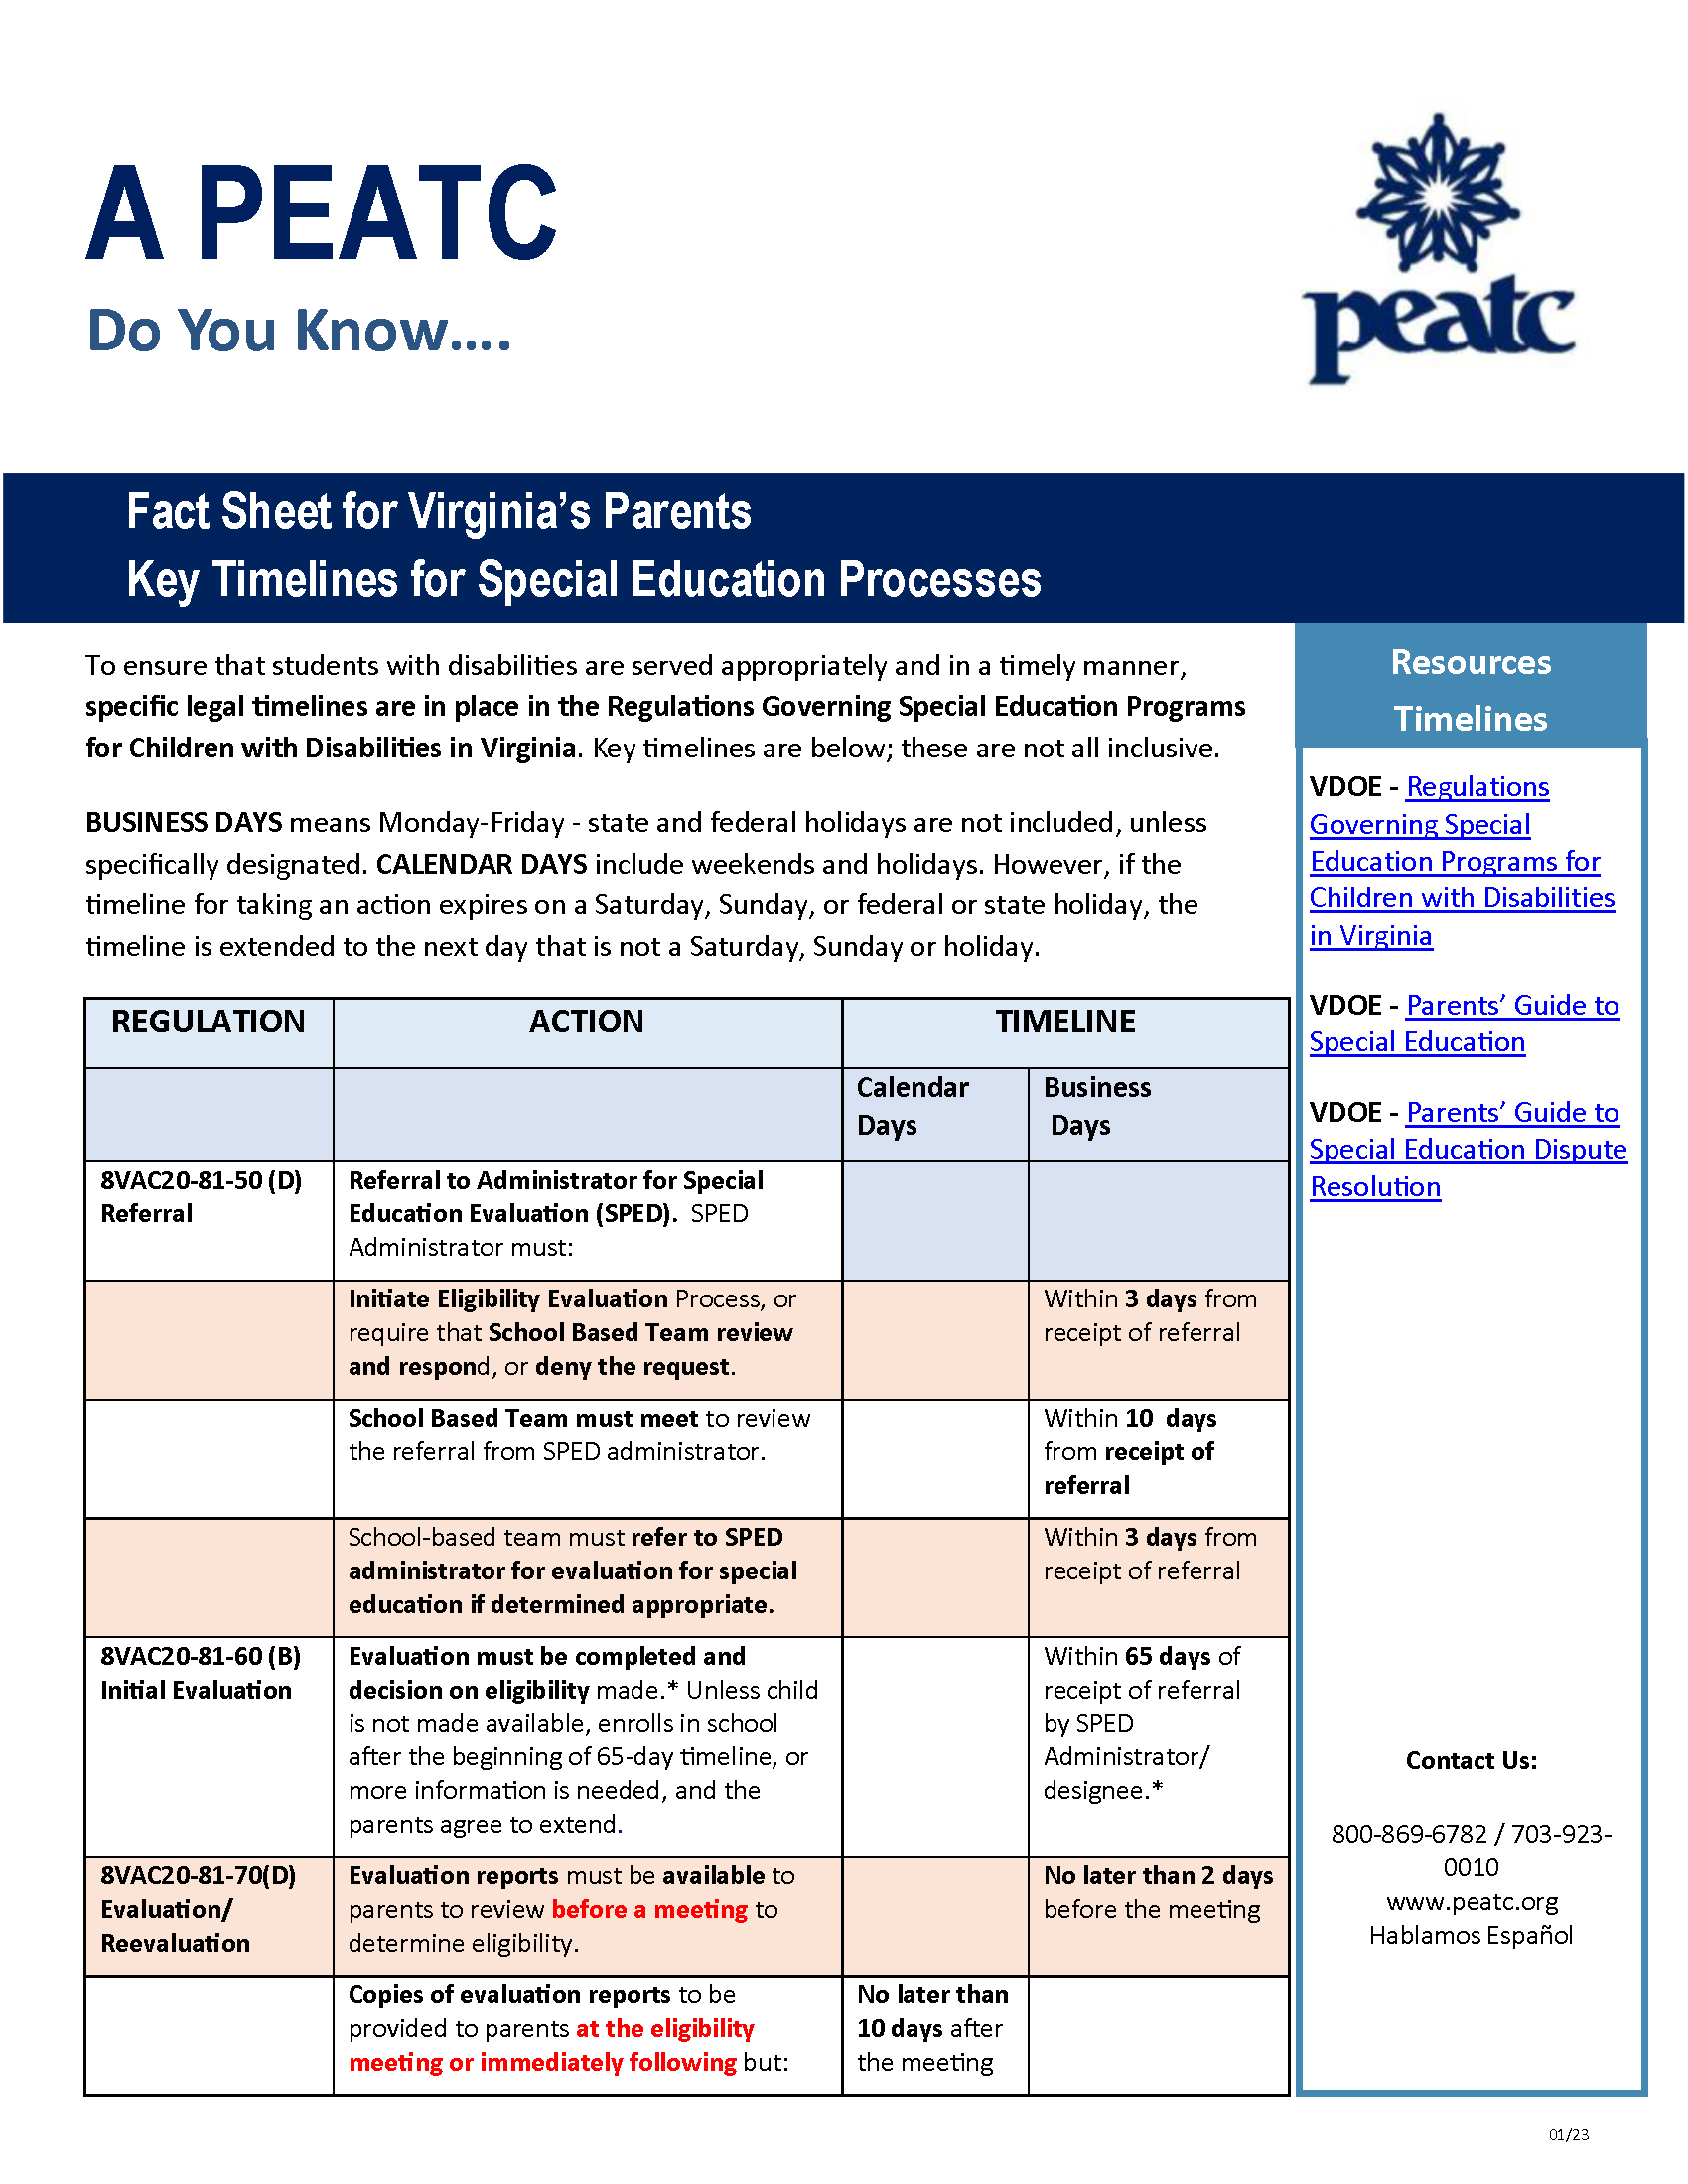 PEATC Key Timelines in Special Education